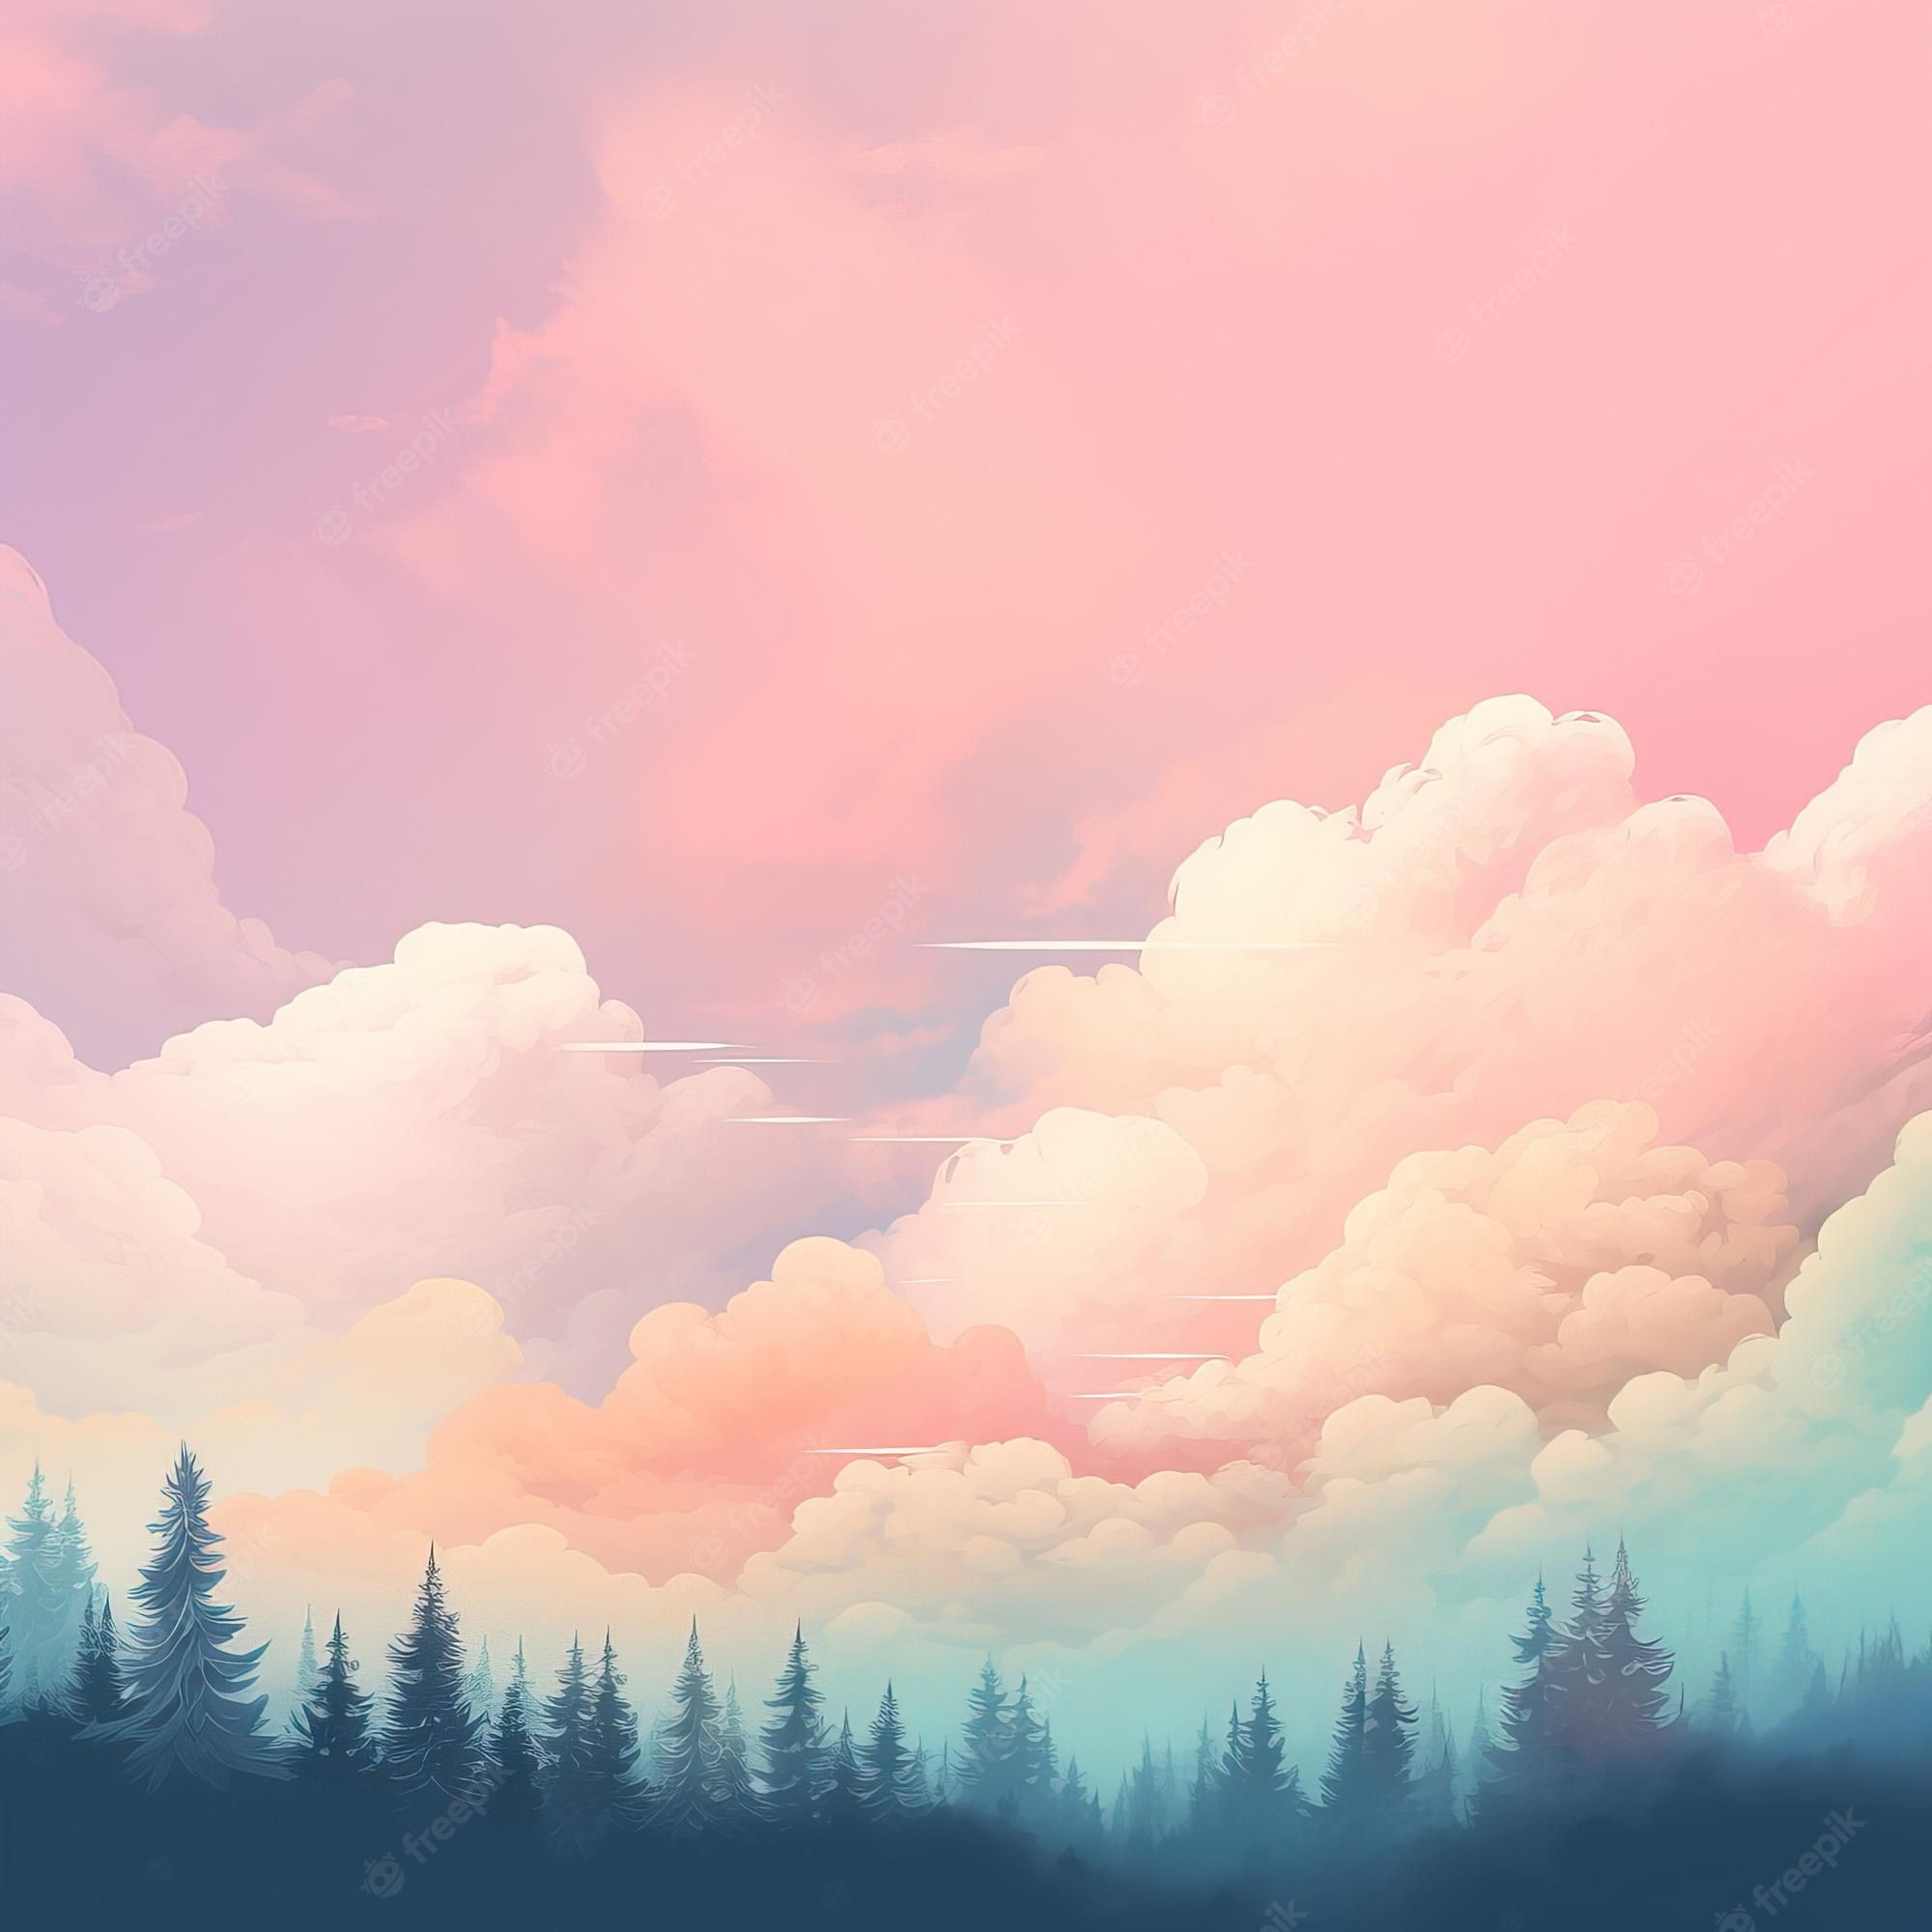 A digital painting of a forest landscape with pine trees and a pink sky - Clean